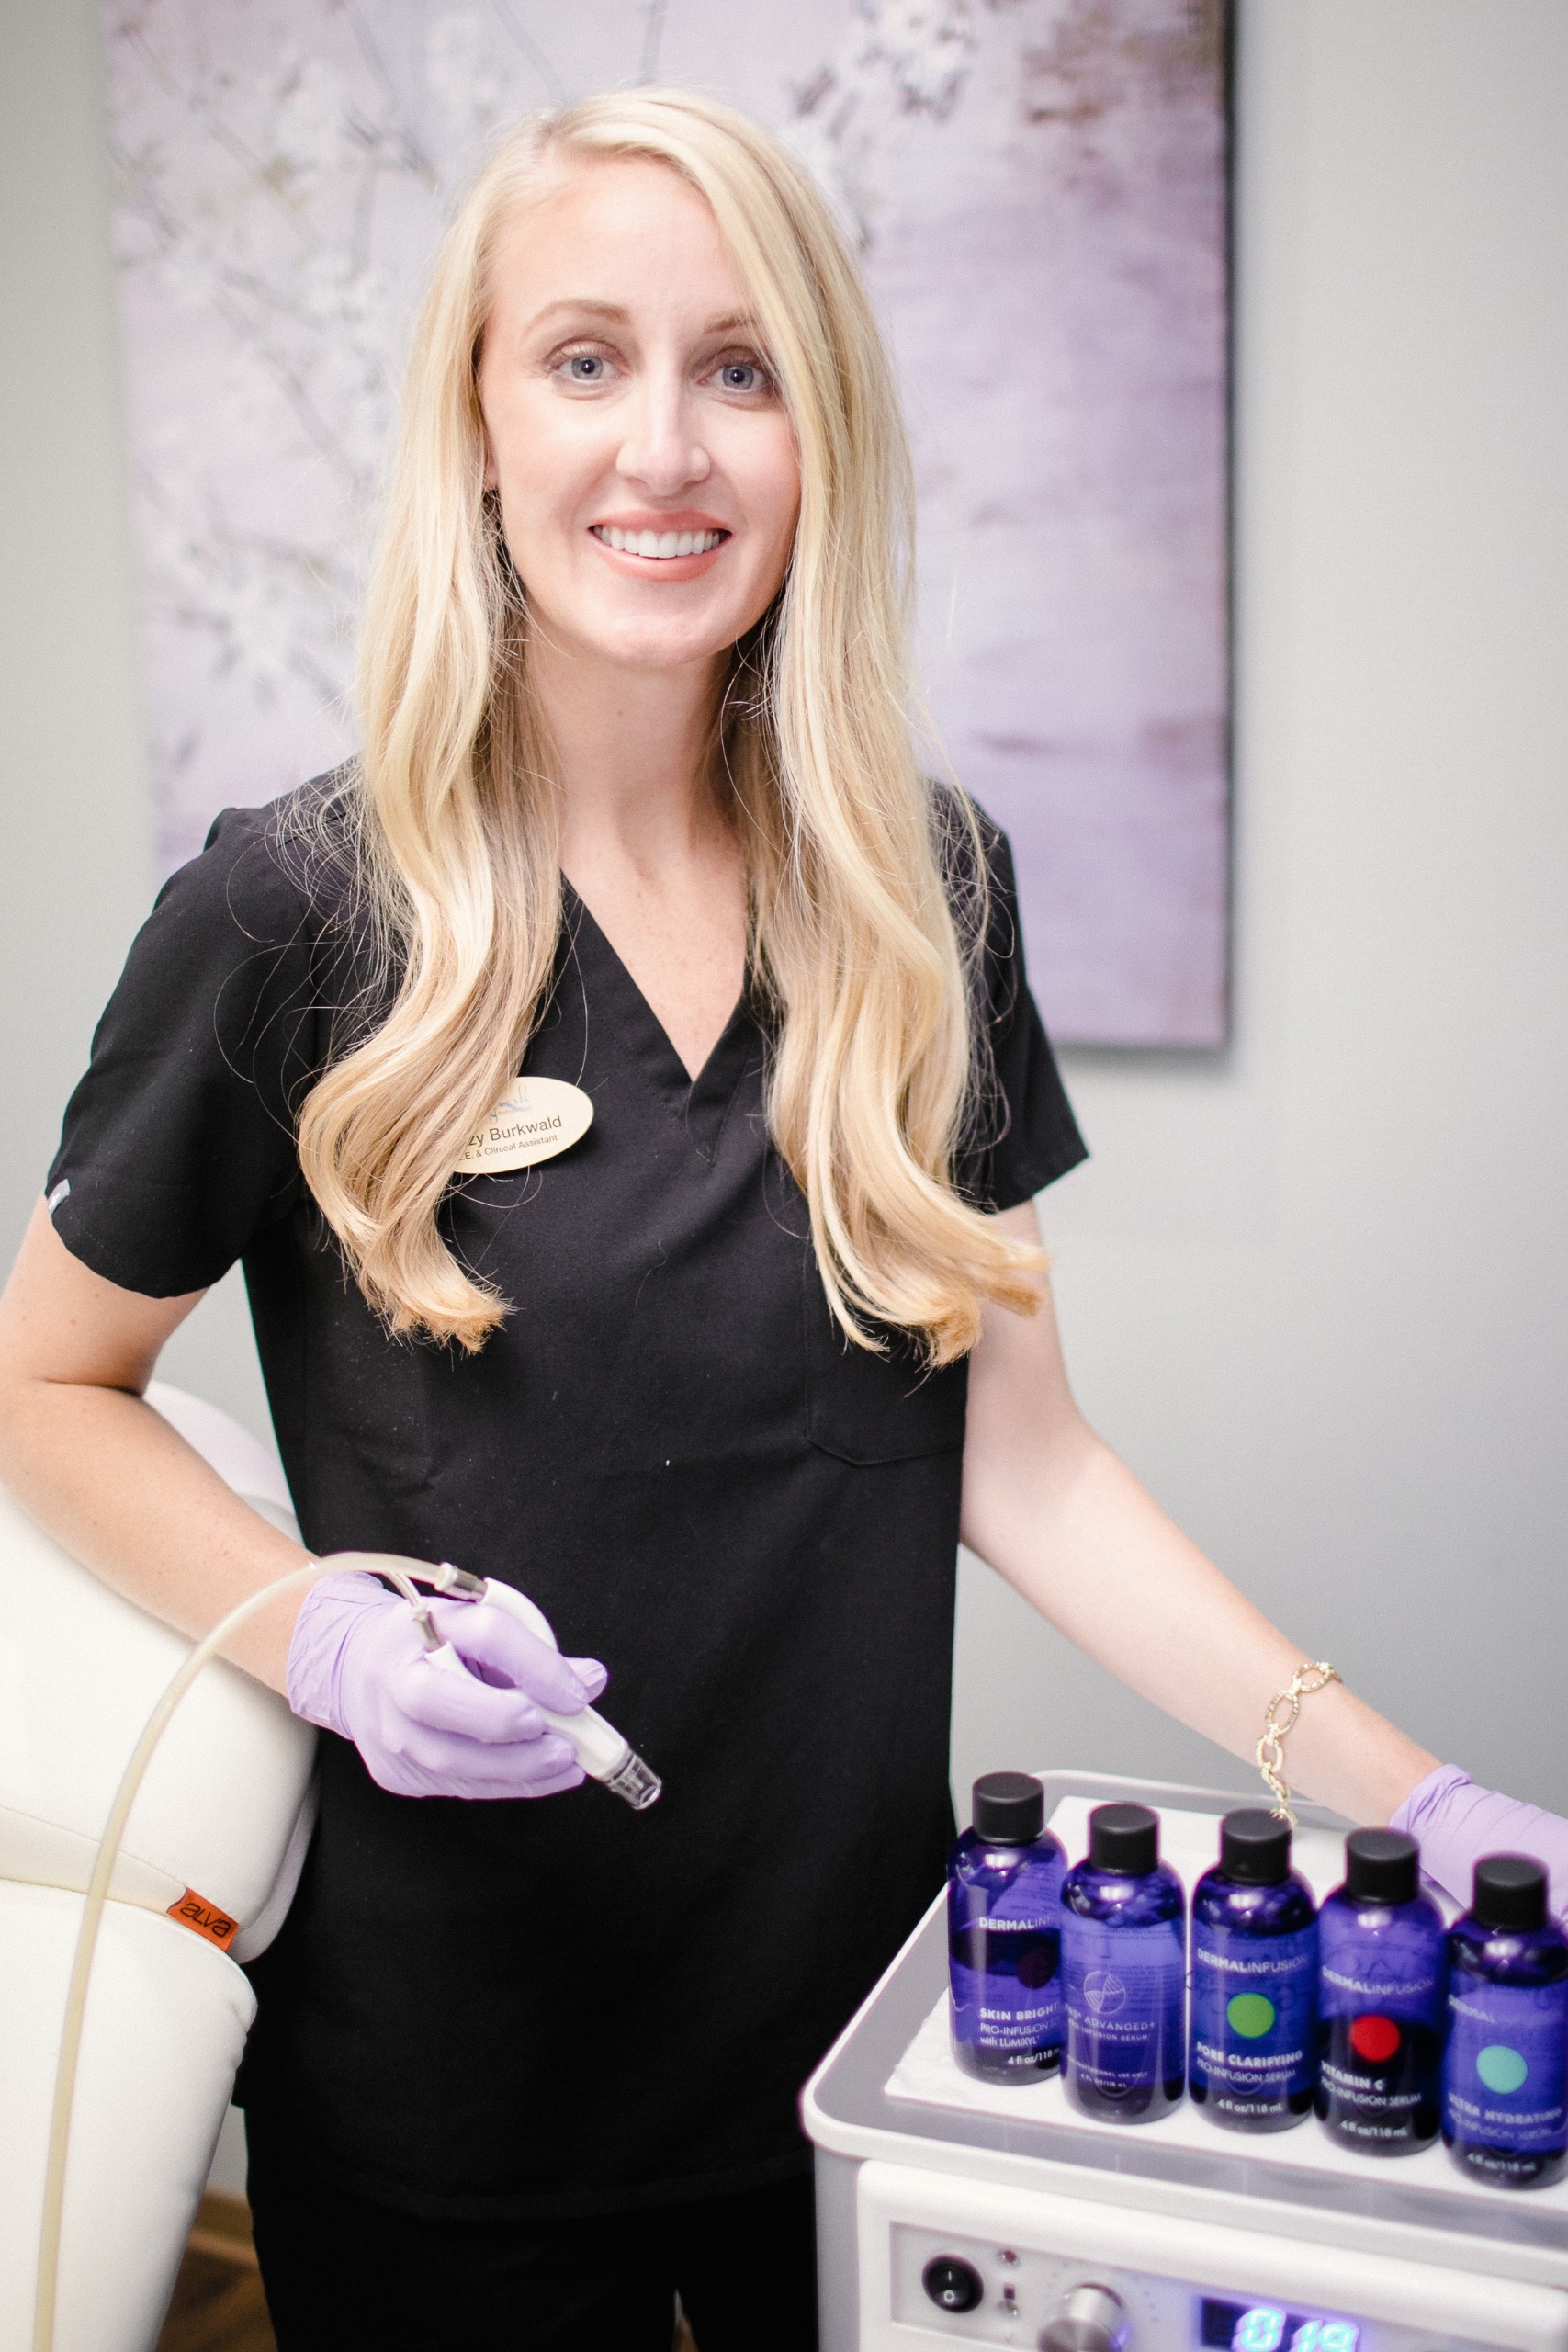 Lizzy Osma<br />
Licensed Aesthetician, Certified Laser Technician